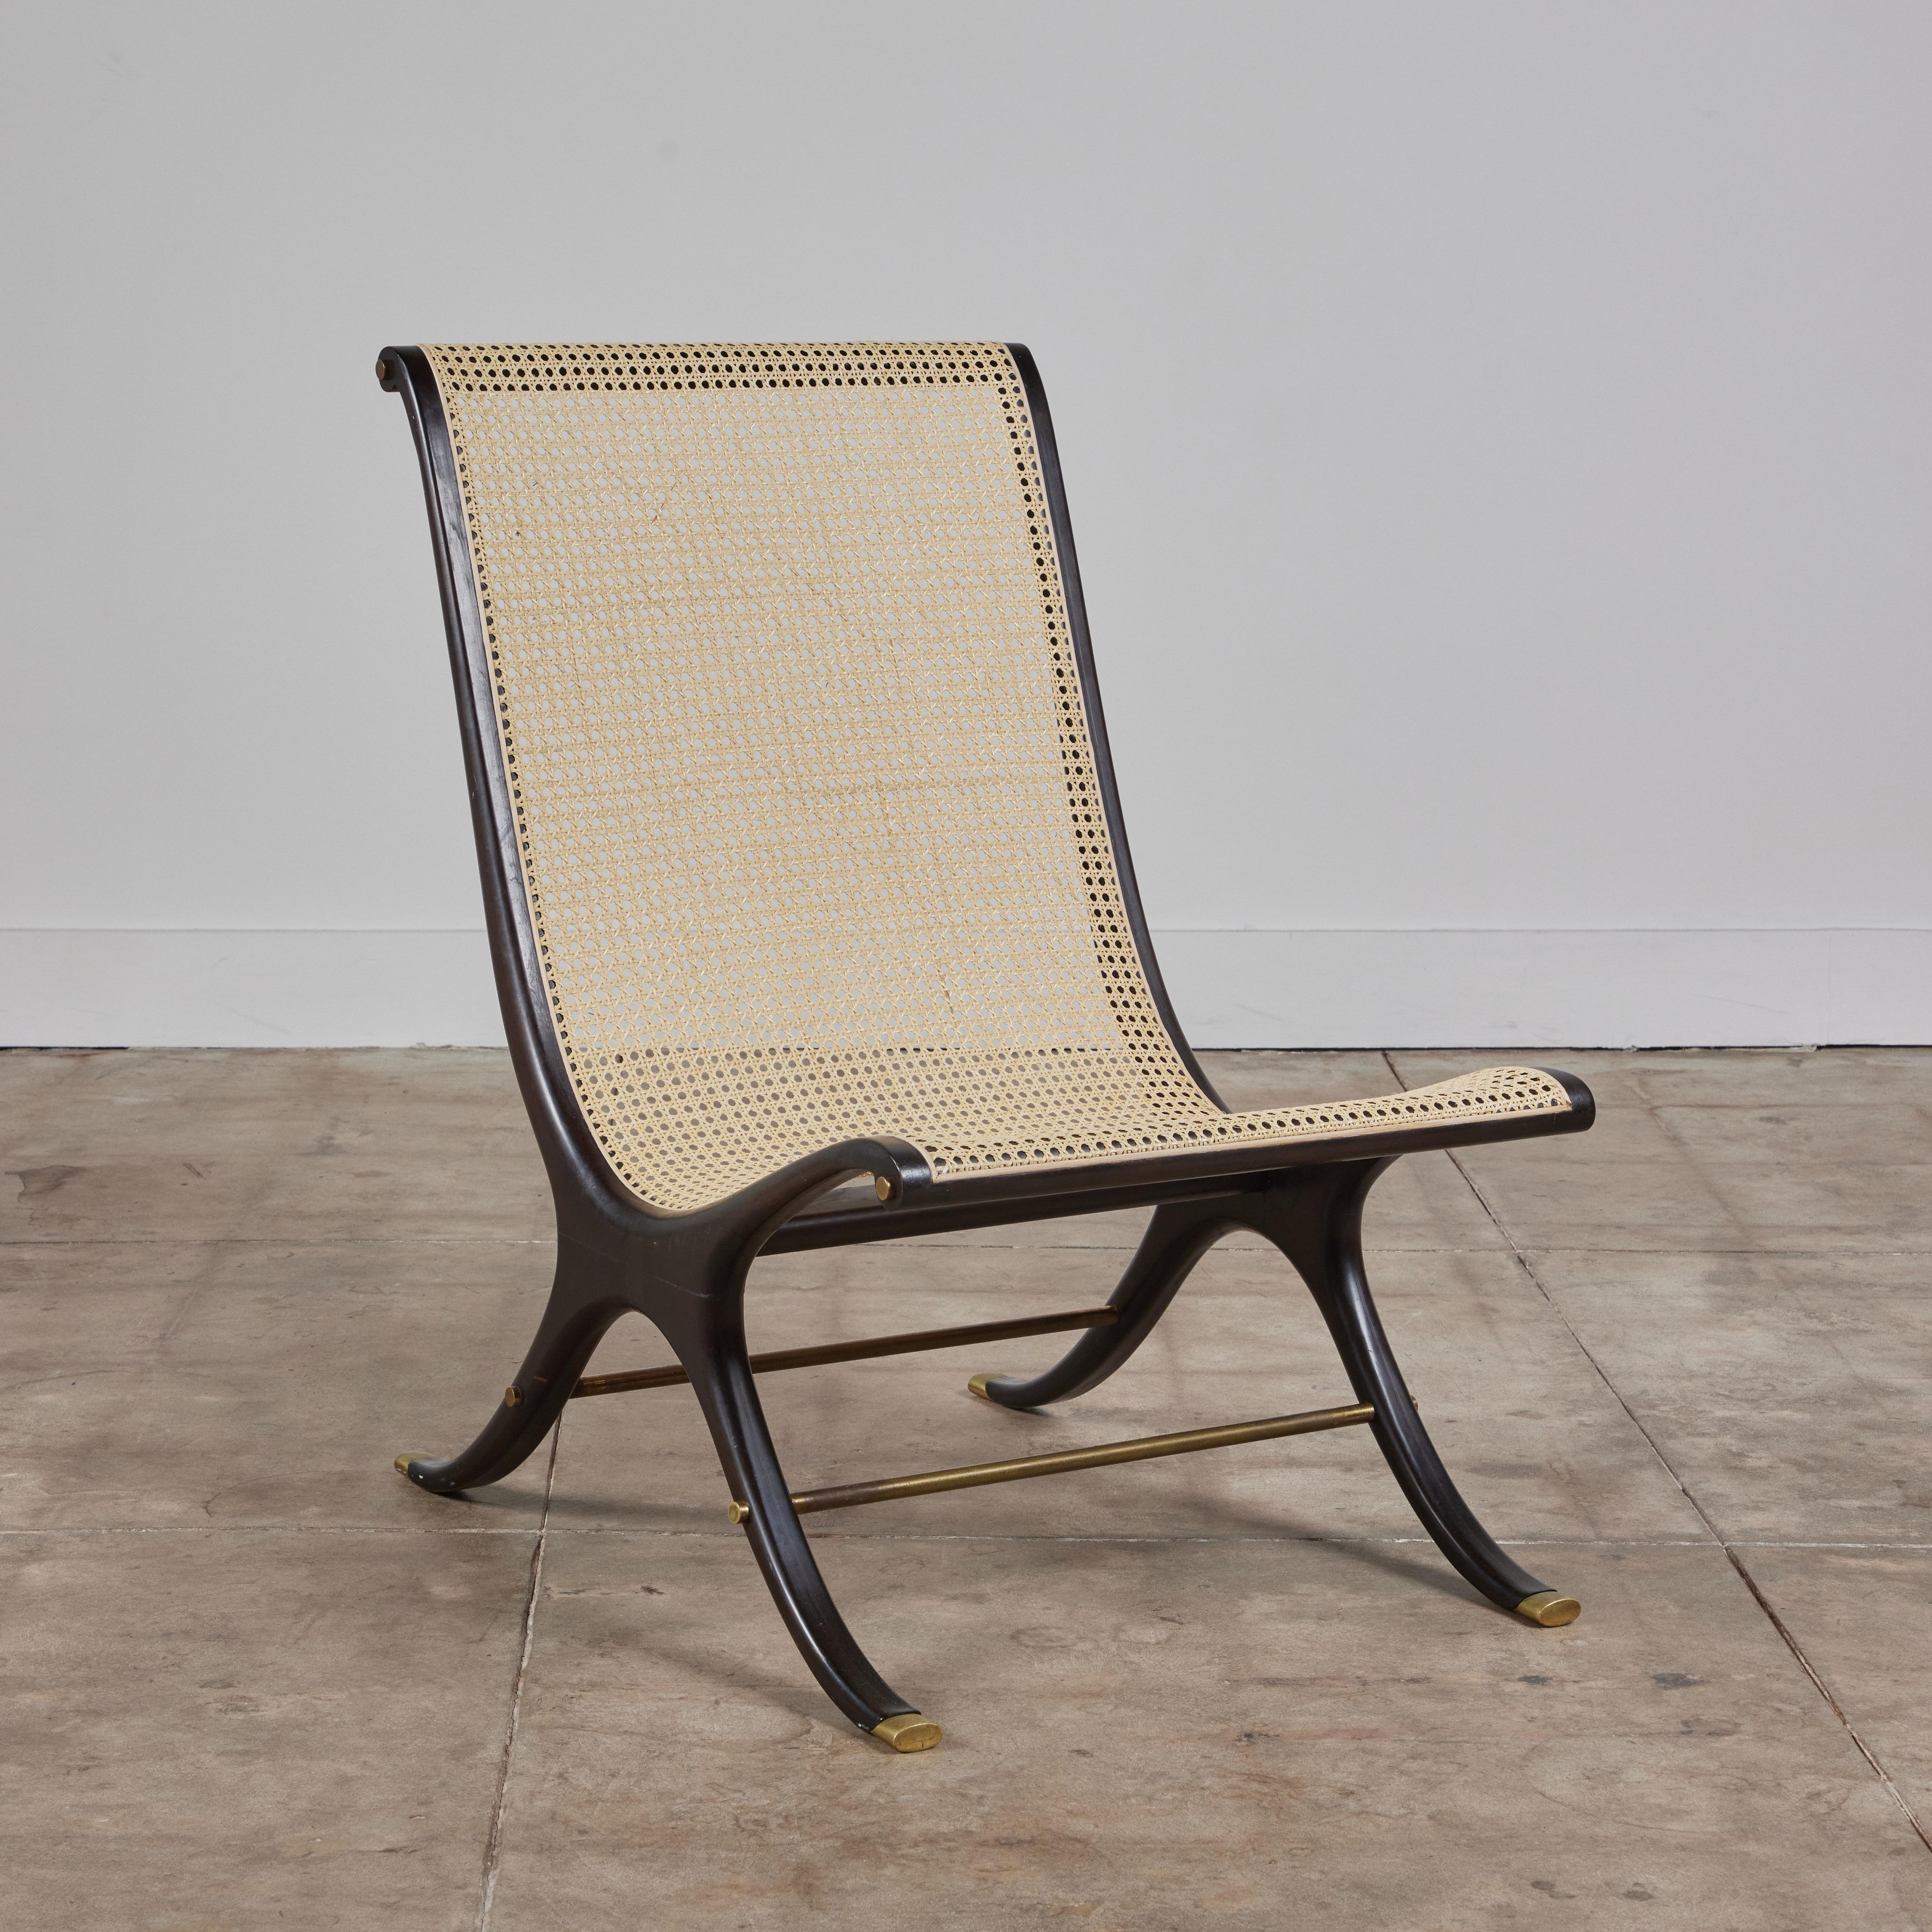 Lounge chair by Gerald Jerome for Heritage c.1960s, USA. This ebonized mahogany frame features a newly caned scoop seat and seatback. The 